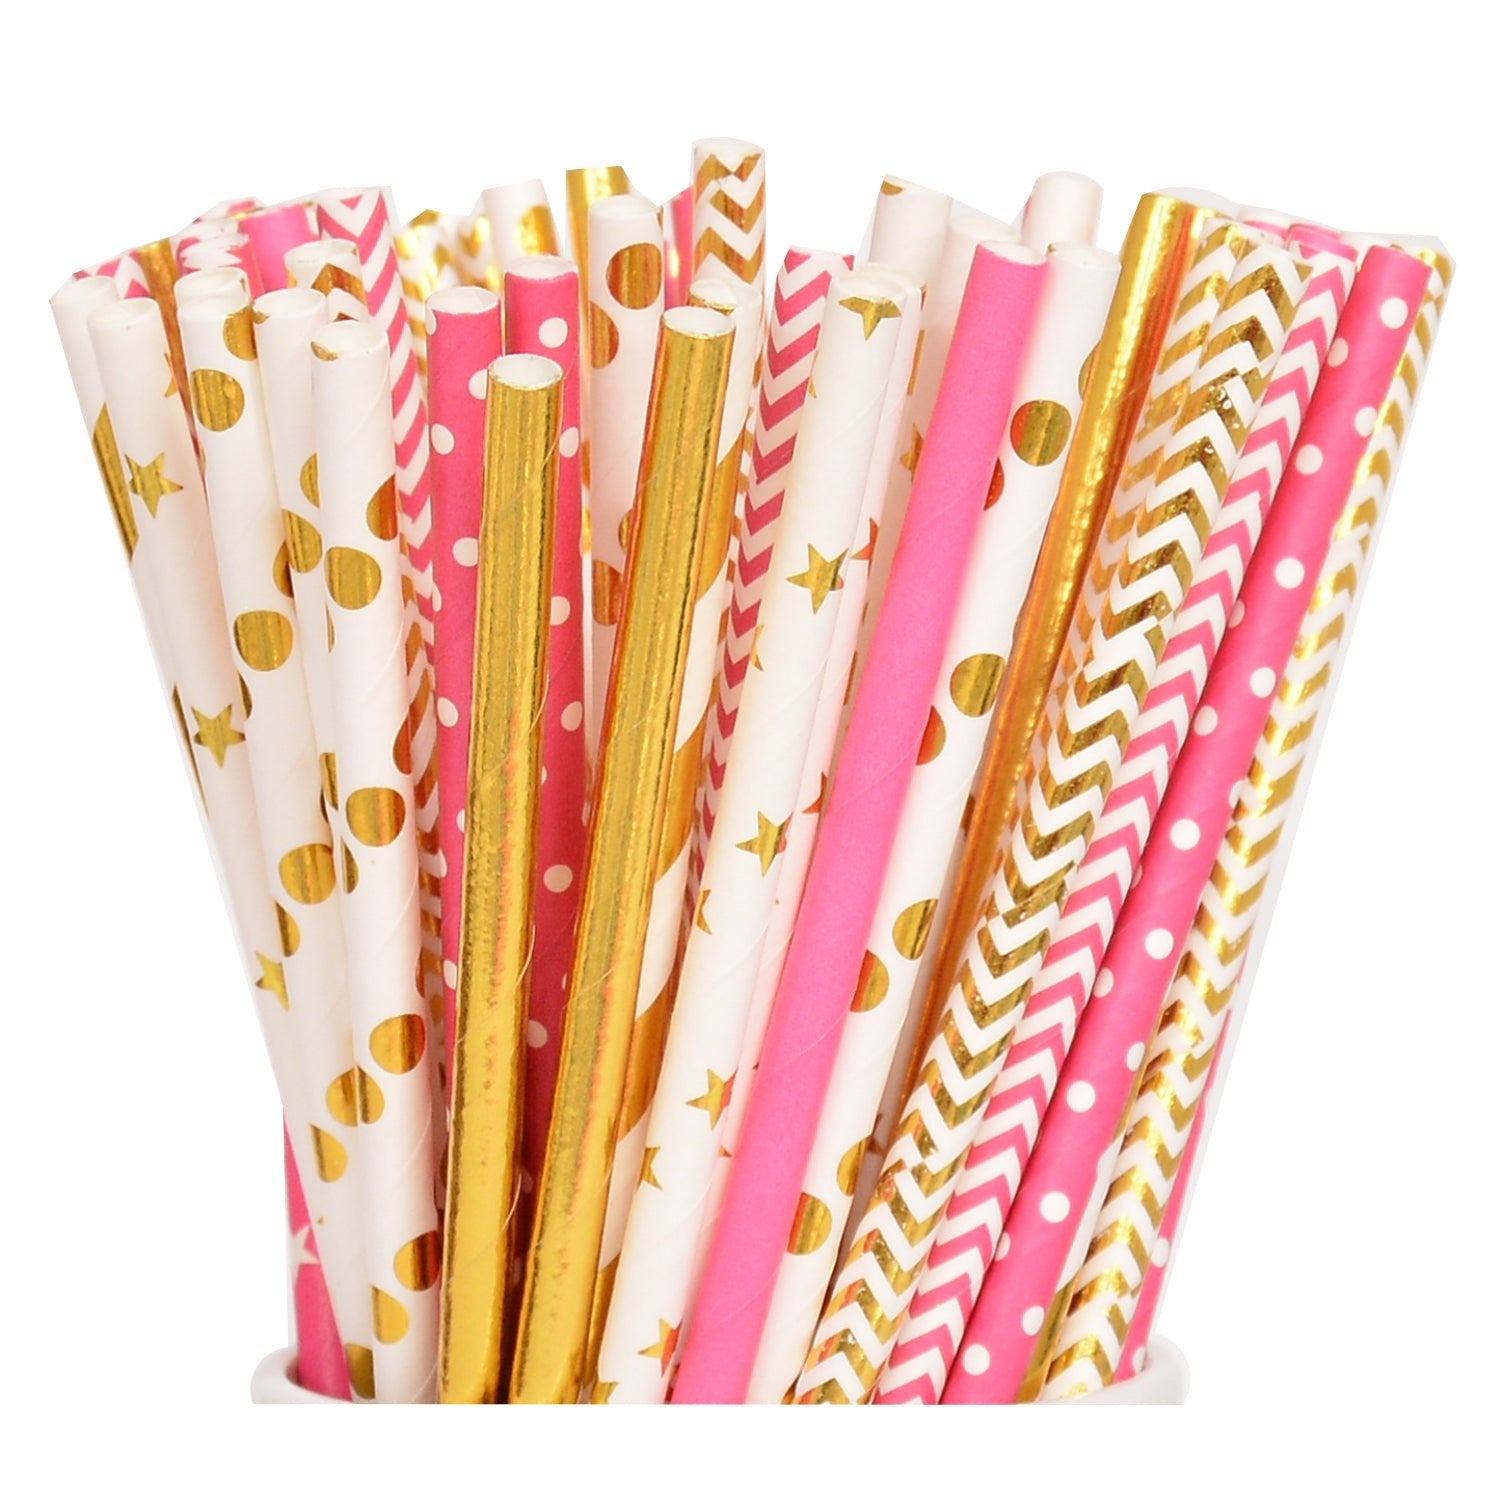 50 Pink and Gold Paper Straws, Pink Straws, Gold Straws, Princess Party Straws -princess-princess baby shower